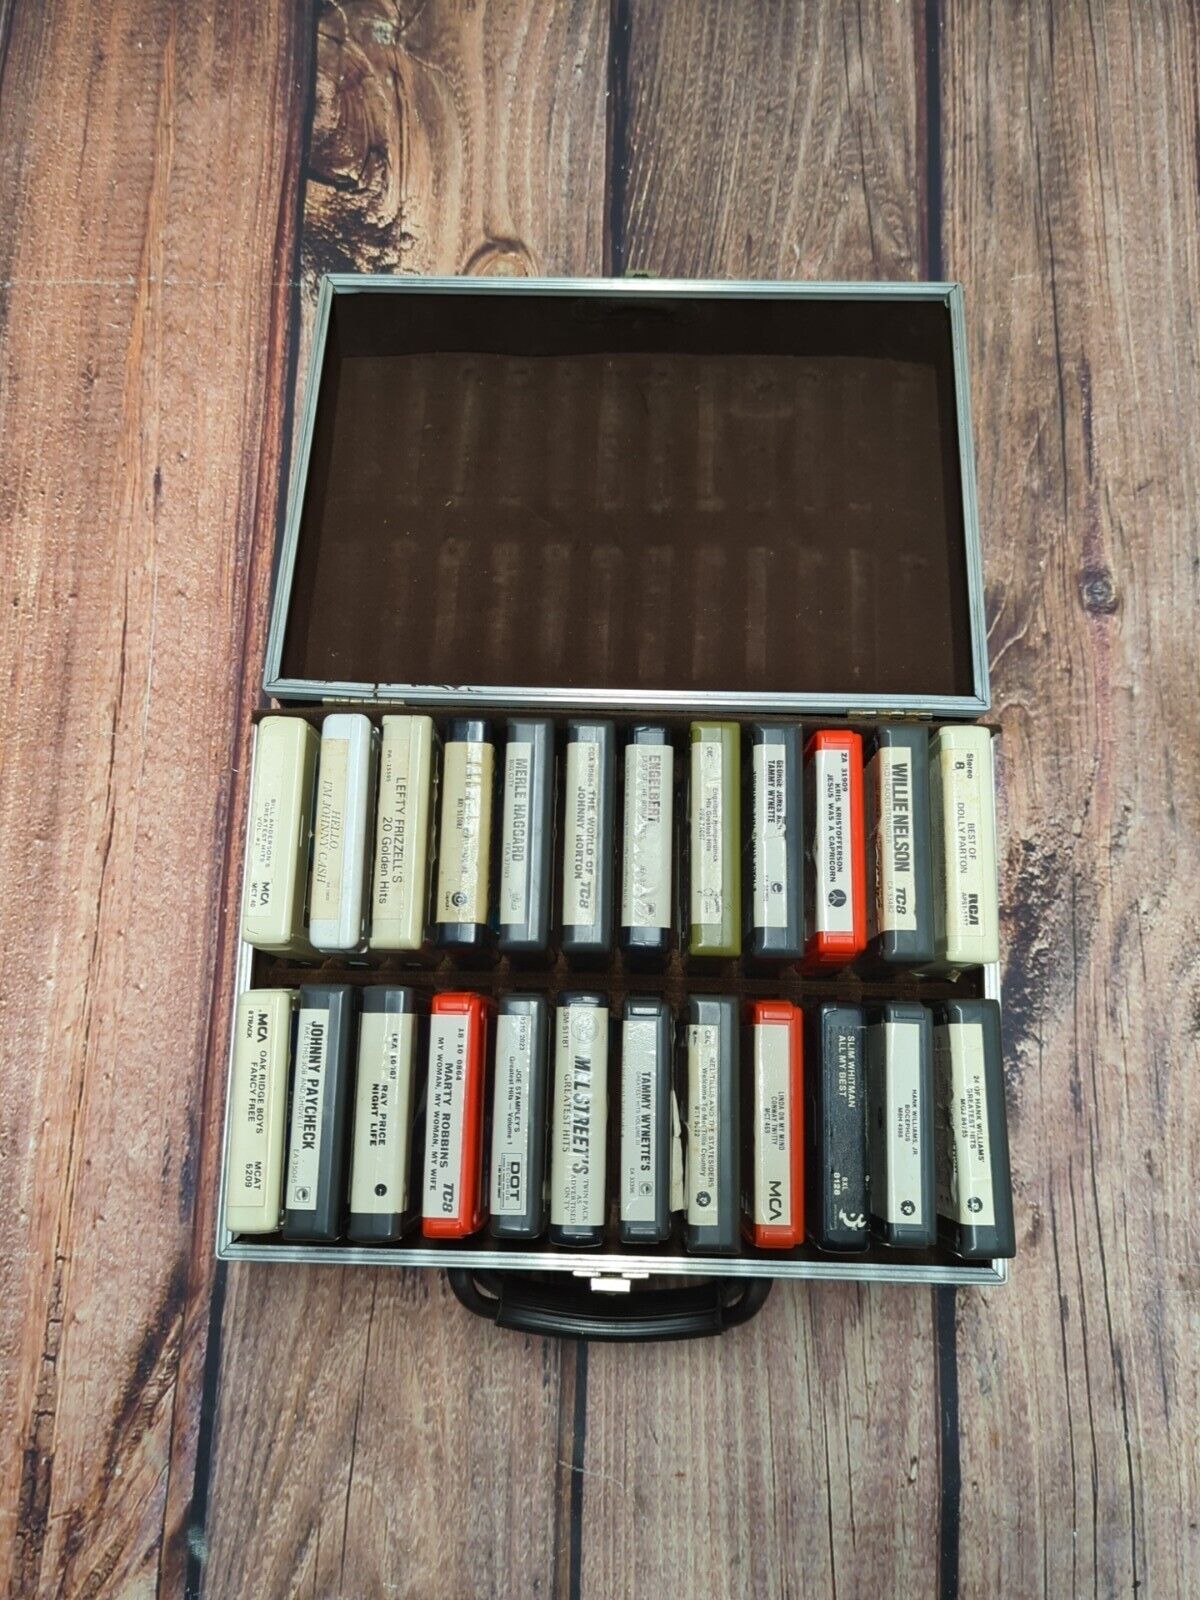 VTG Country Music 8 Track Tape Lot Of 24 with Case and Key